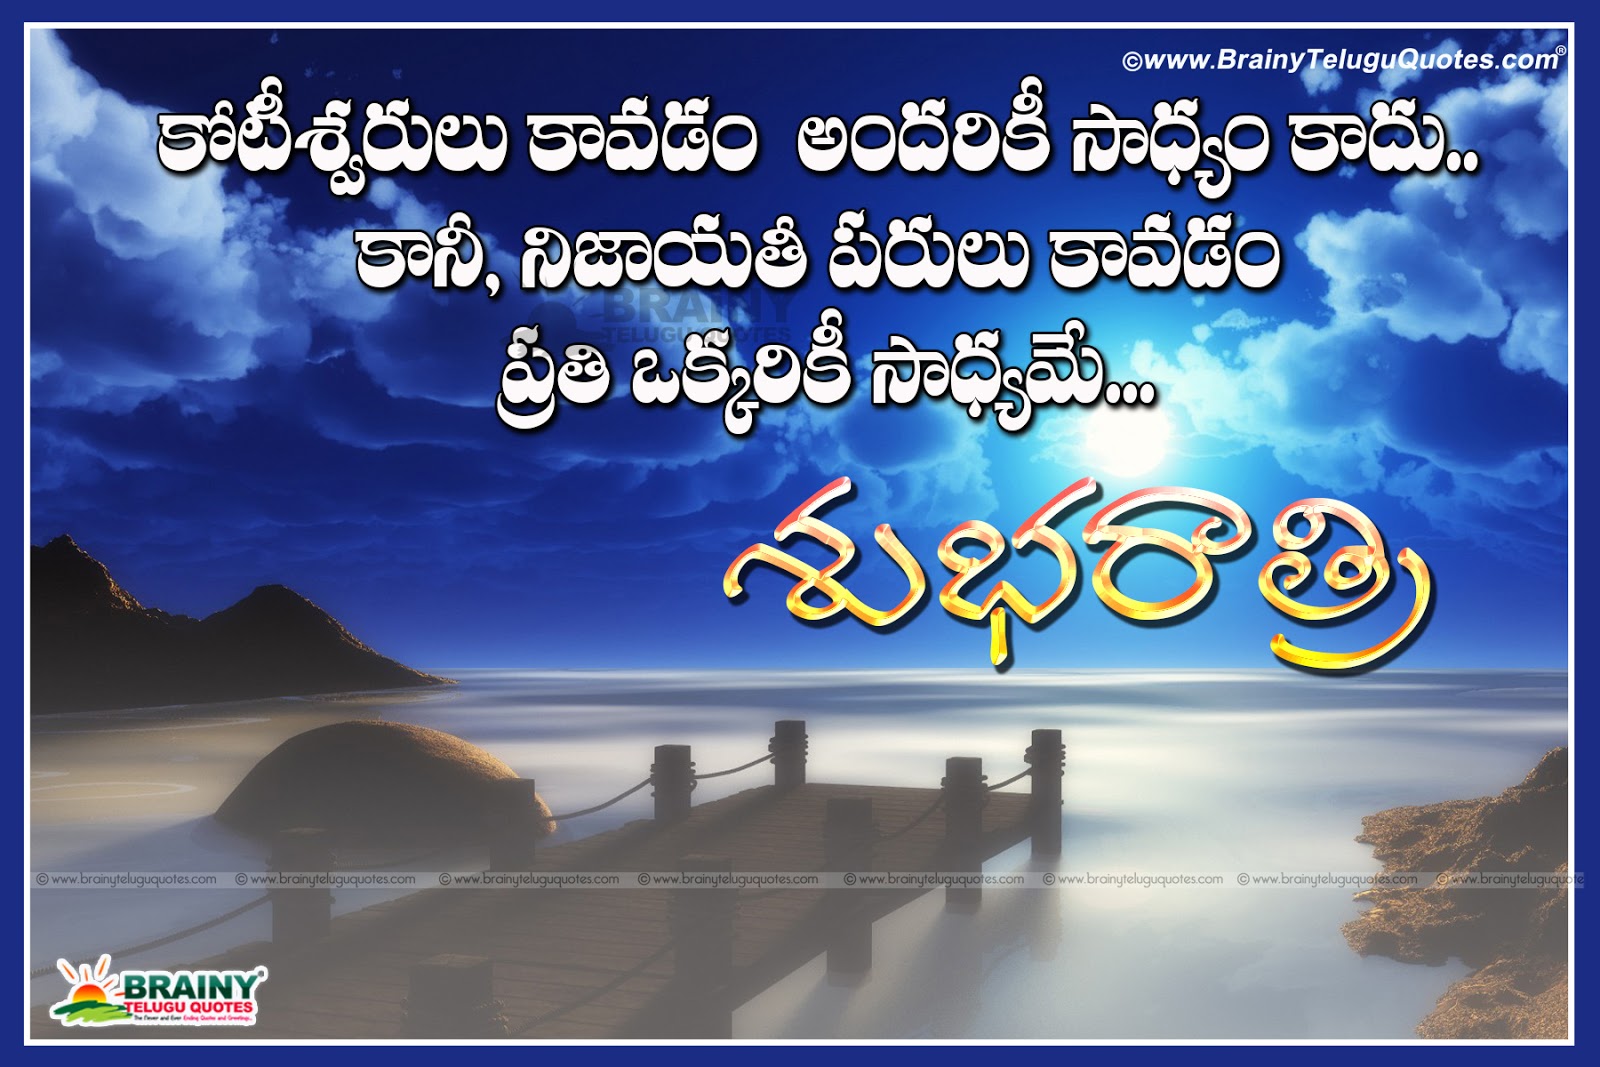 Heart Touching Good Night Telugu Inspirational Quotes With Hd